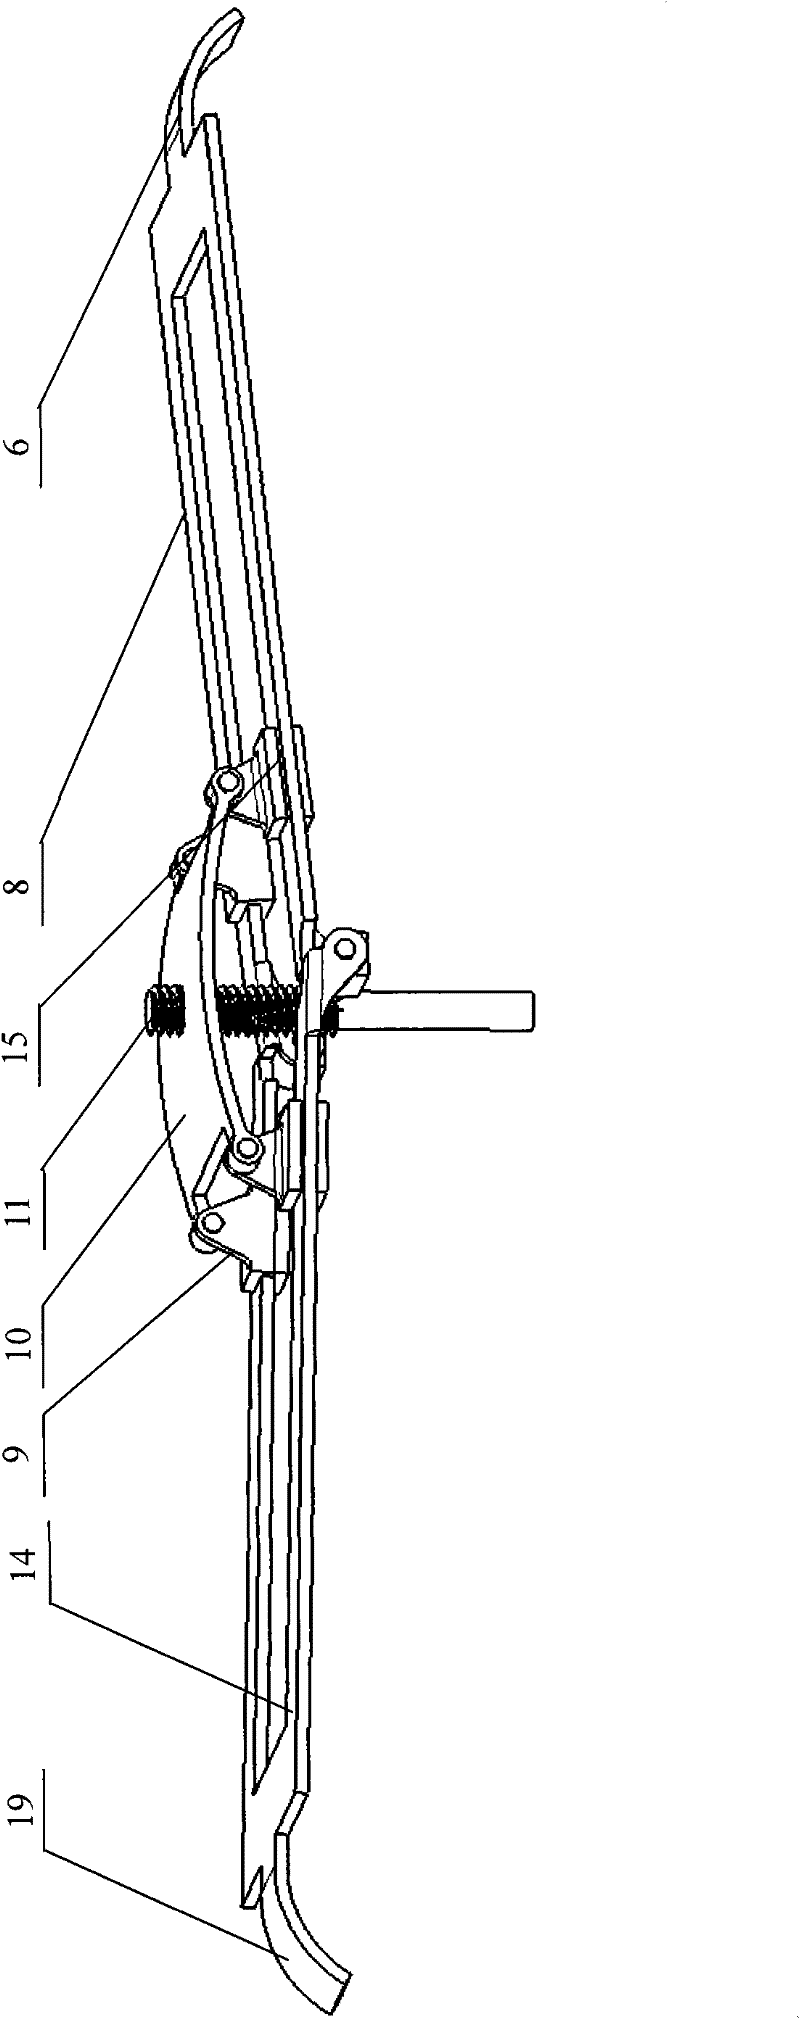 Waist support device of electric driver seat